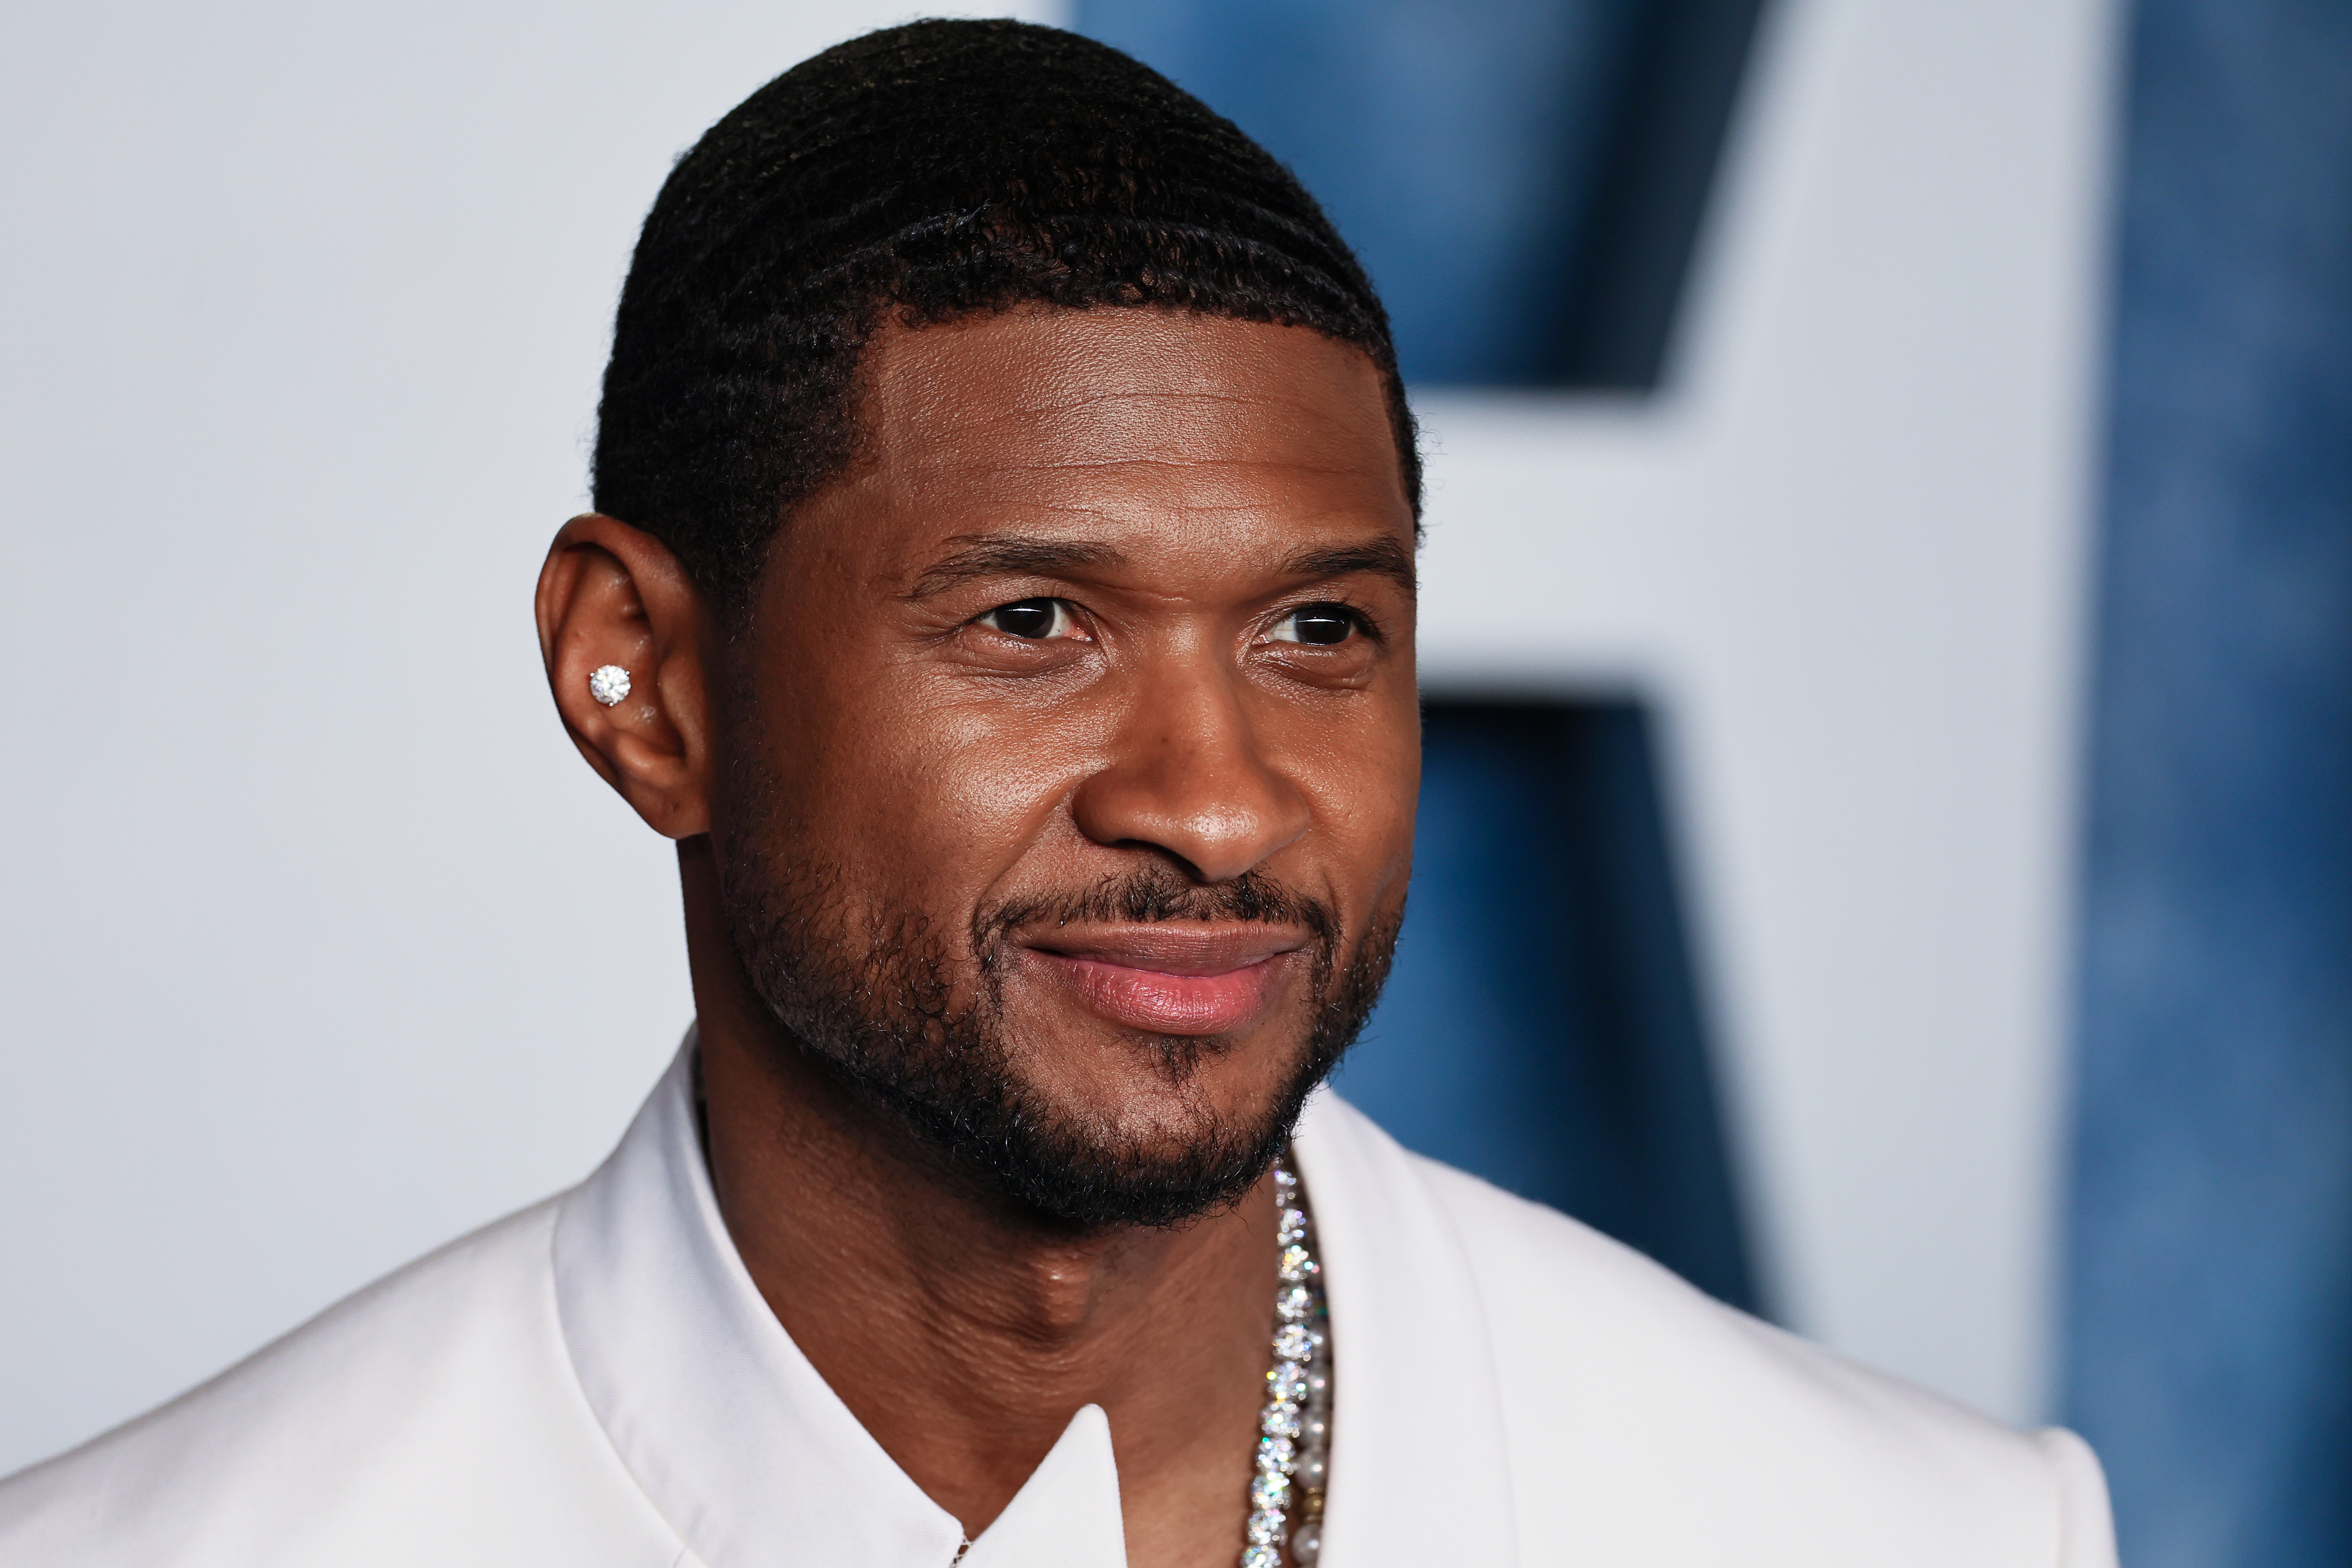 Usher attends the 2023 Vanity Fair Oscar Party on March 12, 2023, in Beverly Hills, California. | Source: Getty Images